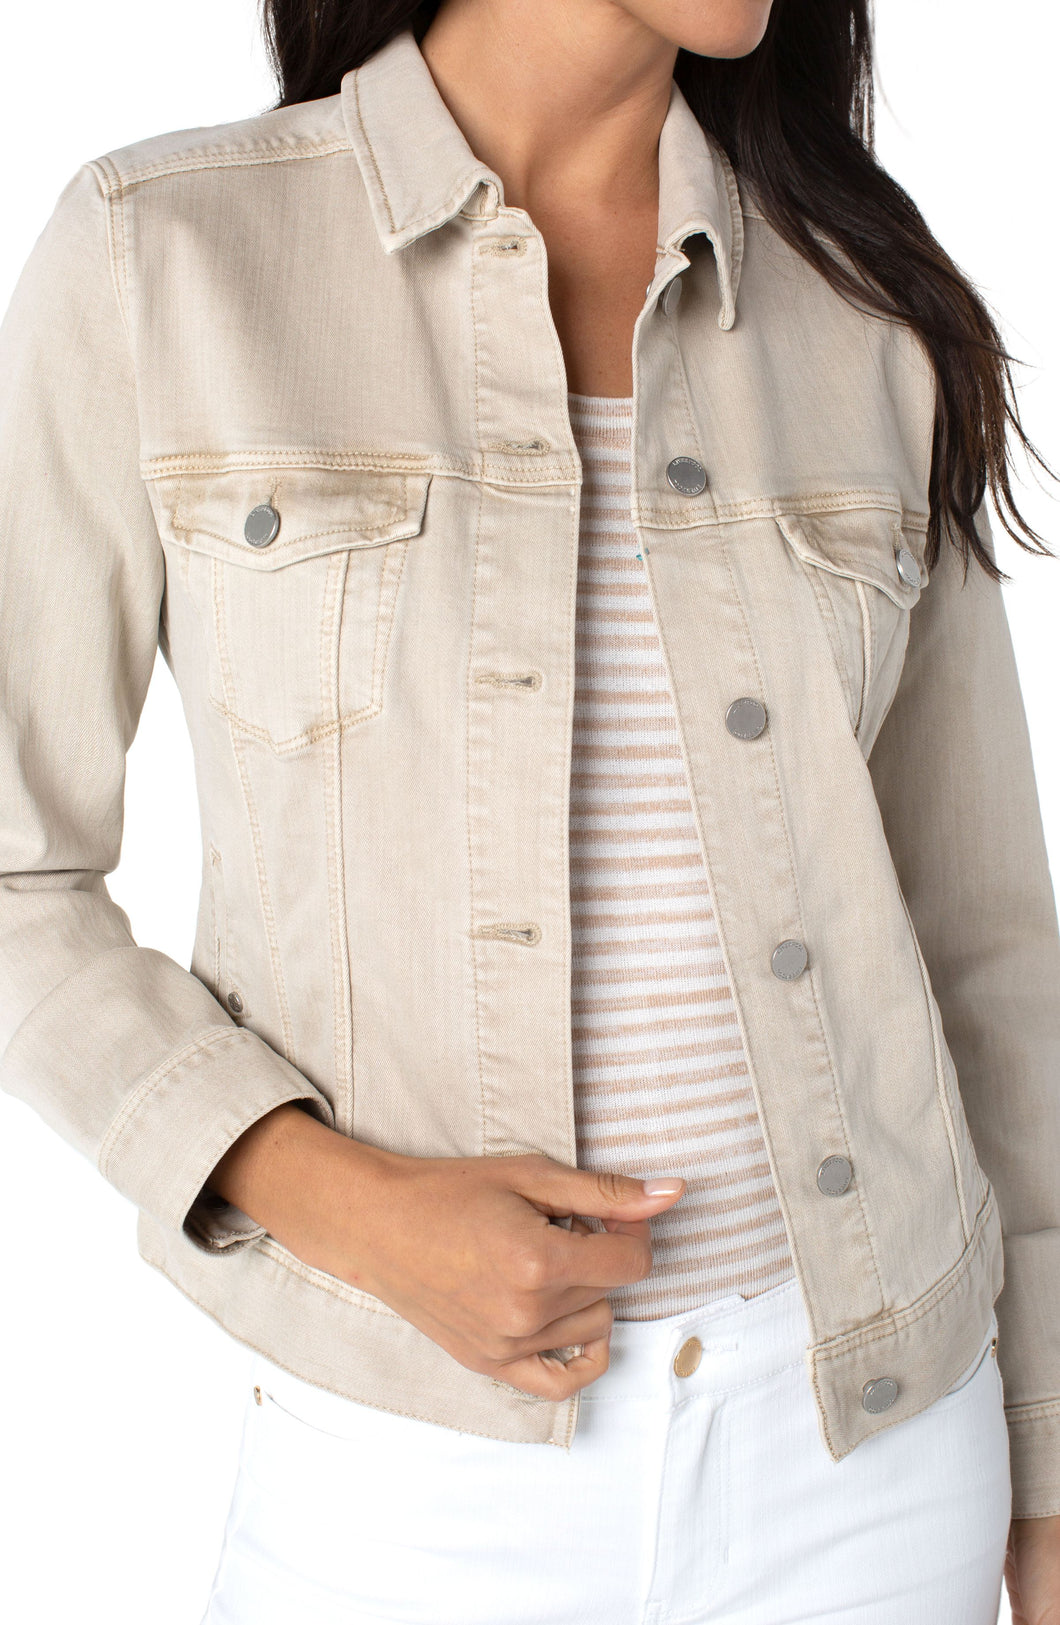 You need this perfect classic denim jacket in Monterey sand color. A jacket for all seasons, our Mandy has amazing stretch and recovery. You'll find this style becomes your go to layering item for everyday outfits.   Color- Monterey Sand- Light tan. Silver buttons and hardware. Amazing stretch and recovery. Slub stretch twill.